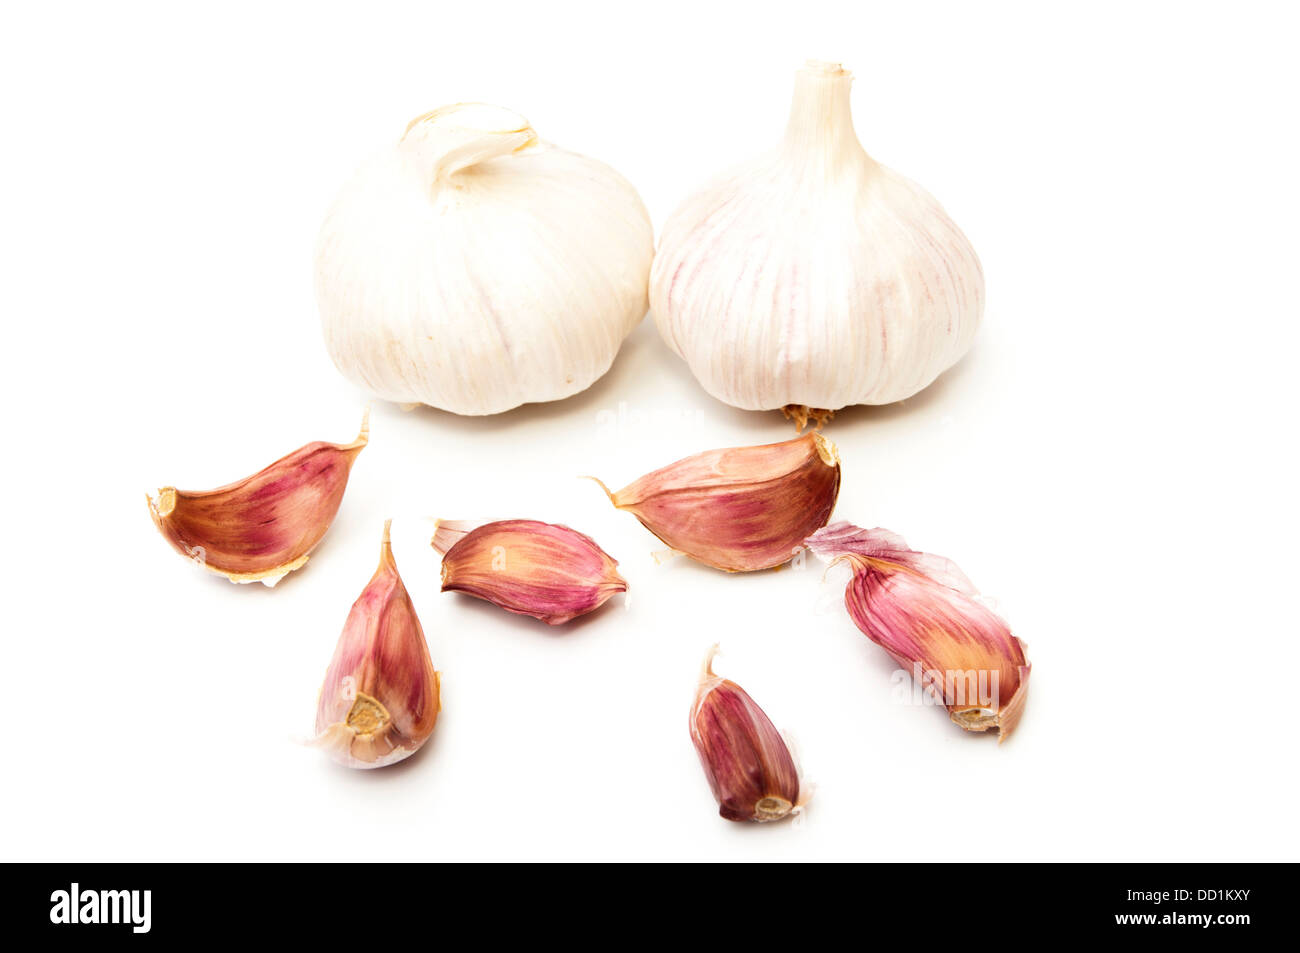 garlic and garlic cloves on a white background Stock Photo